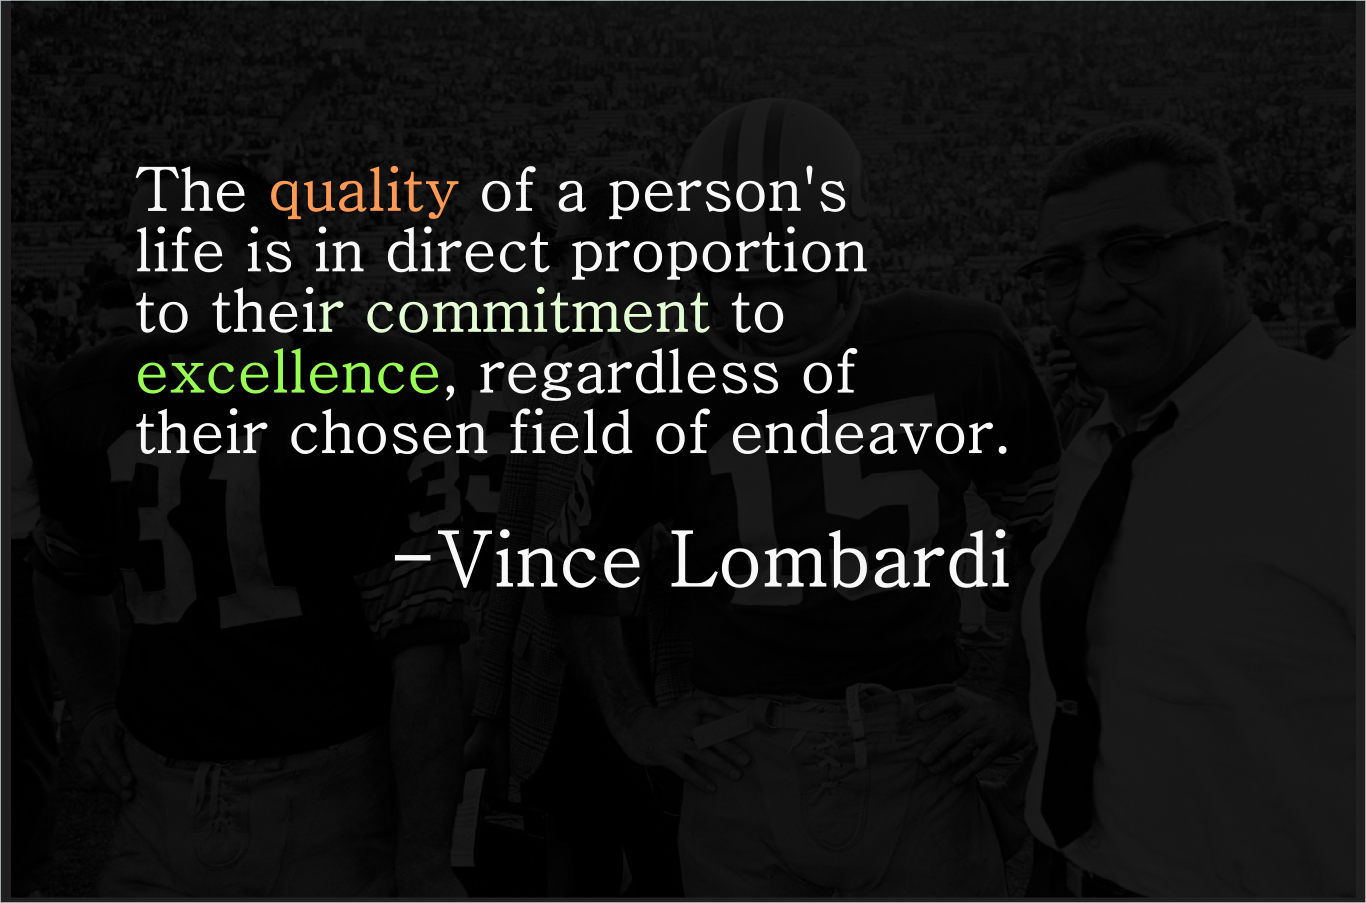 Vince Lombardi's quote